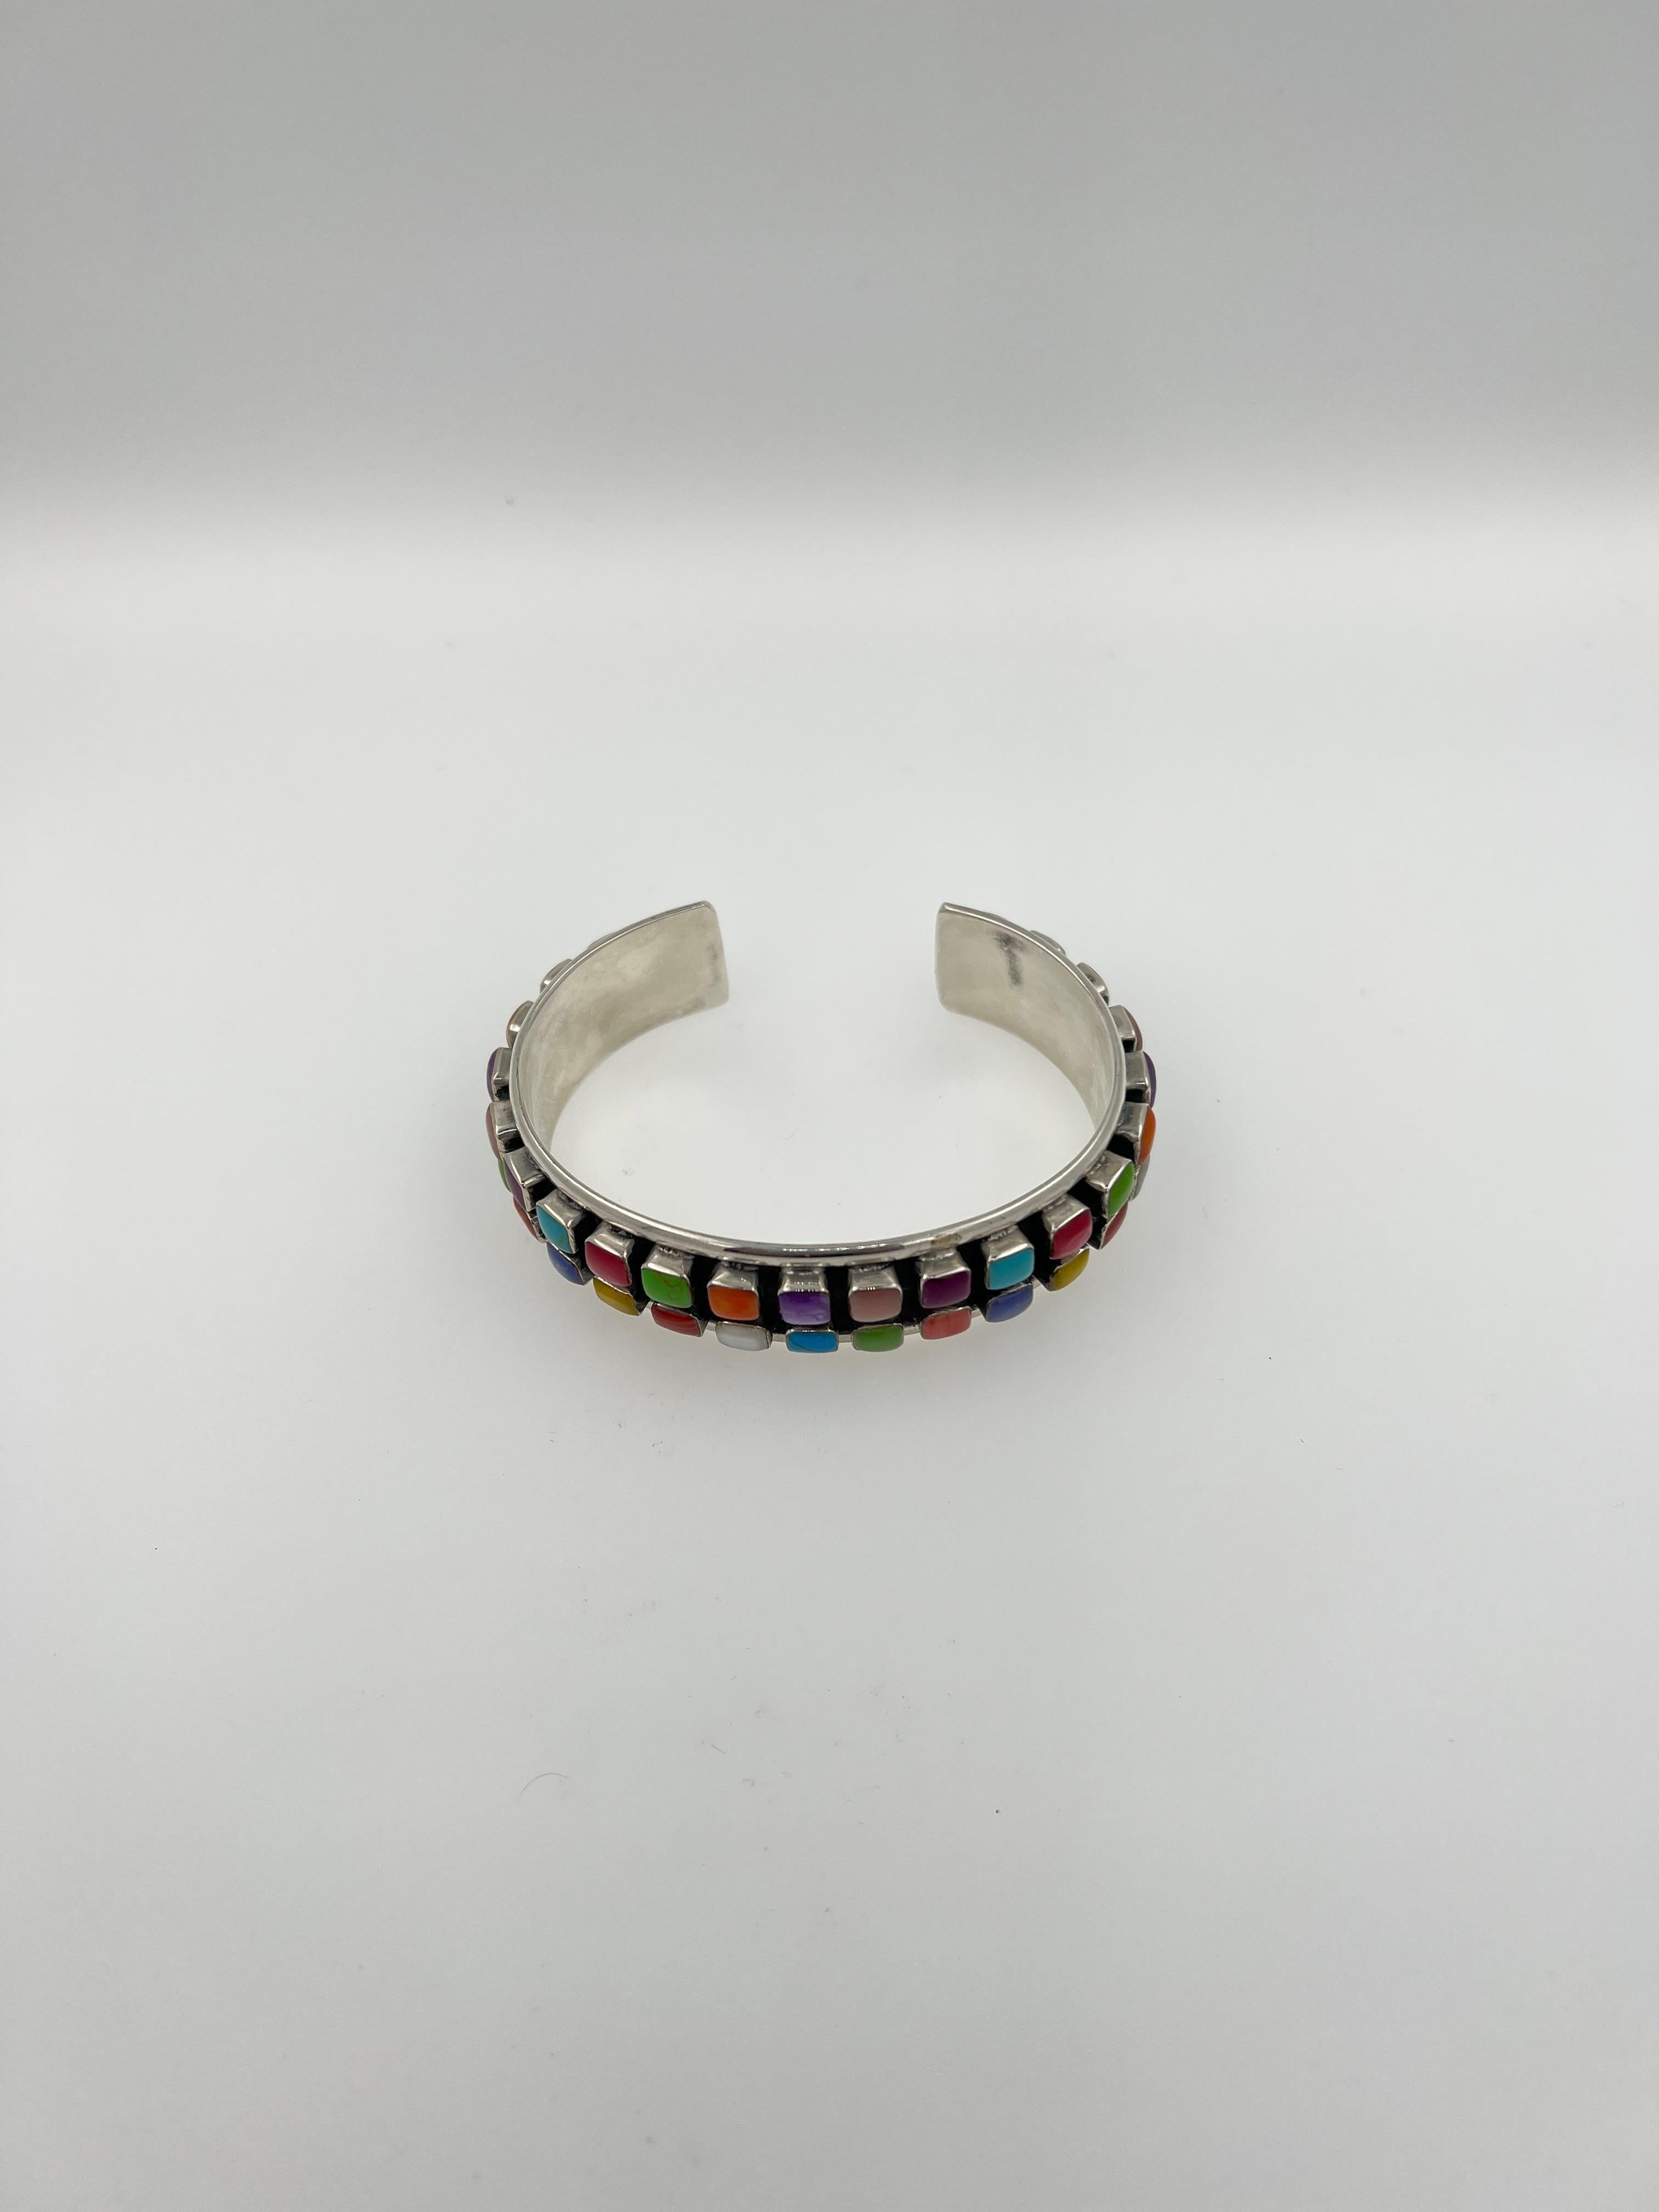 Geometric Colored Rainbow Cab Gemstone Sterling Silver Wide Cuff Bangle Bracelet For Sale 2